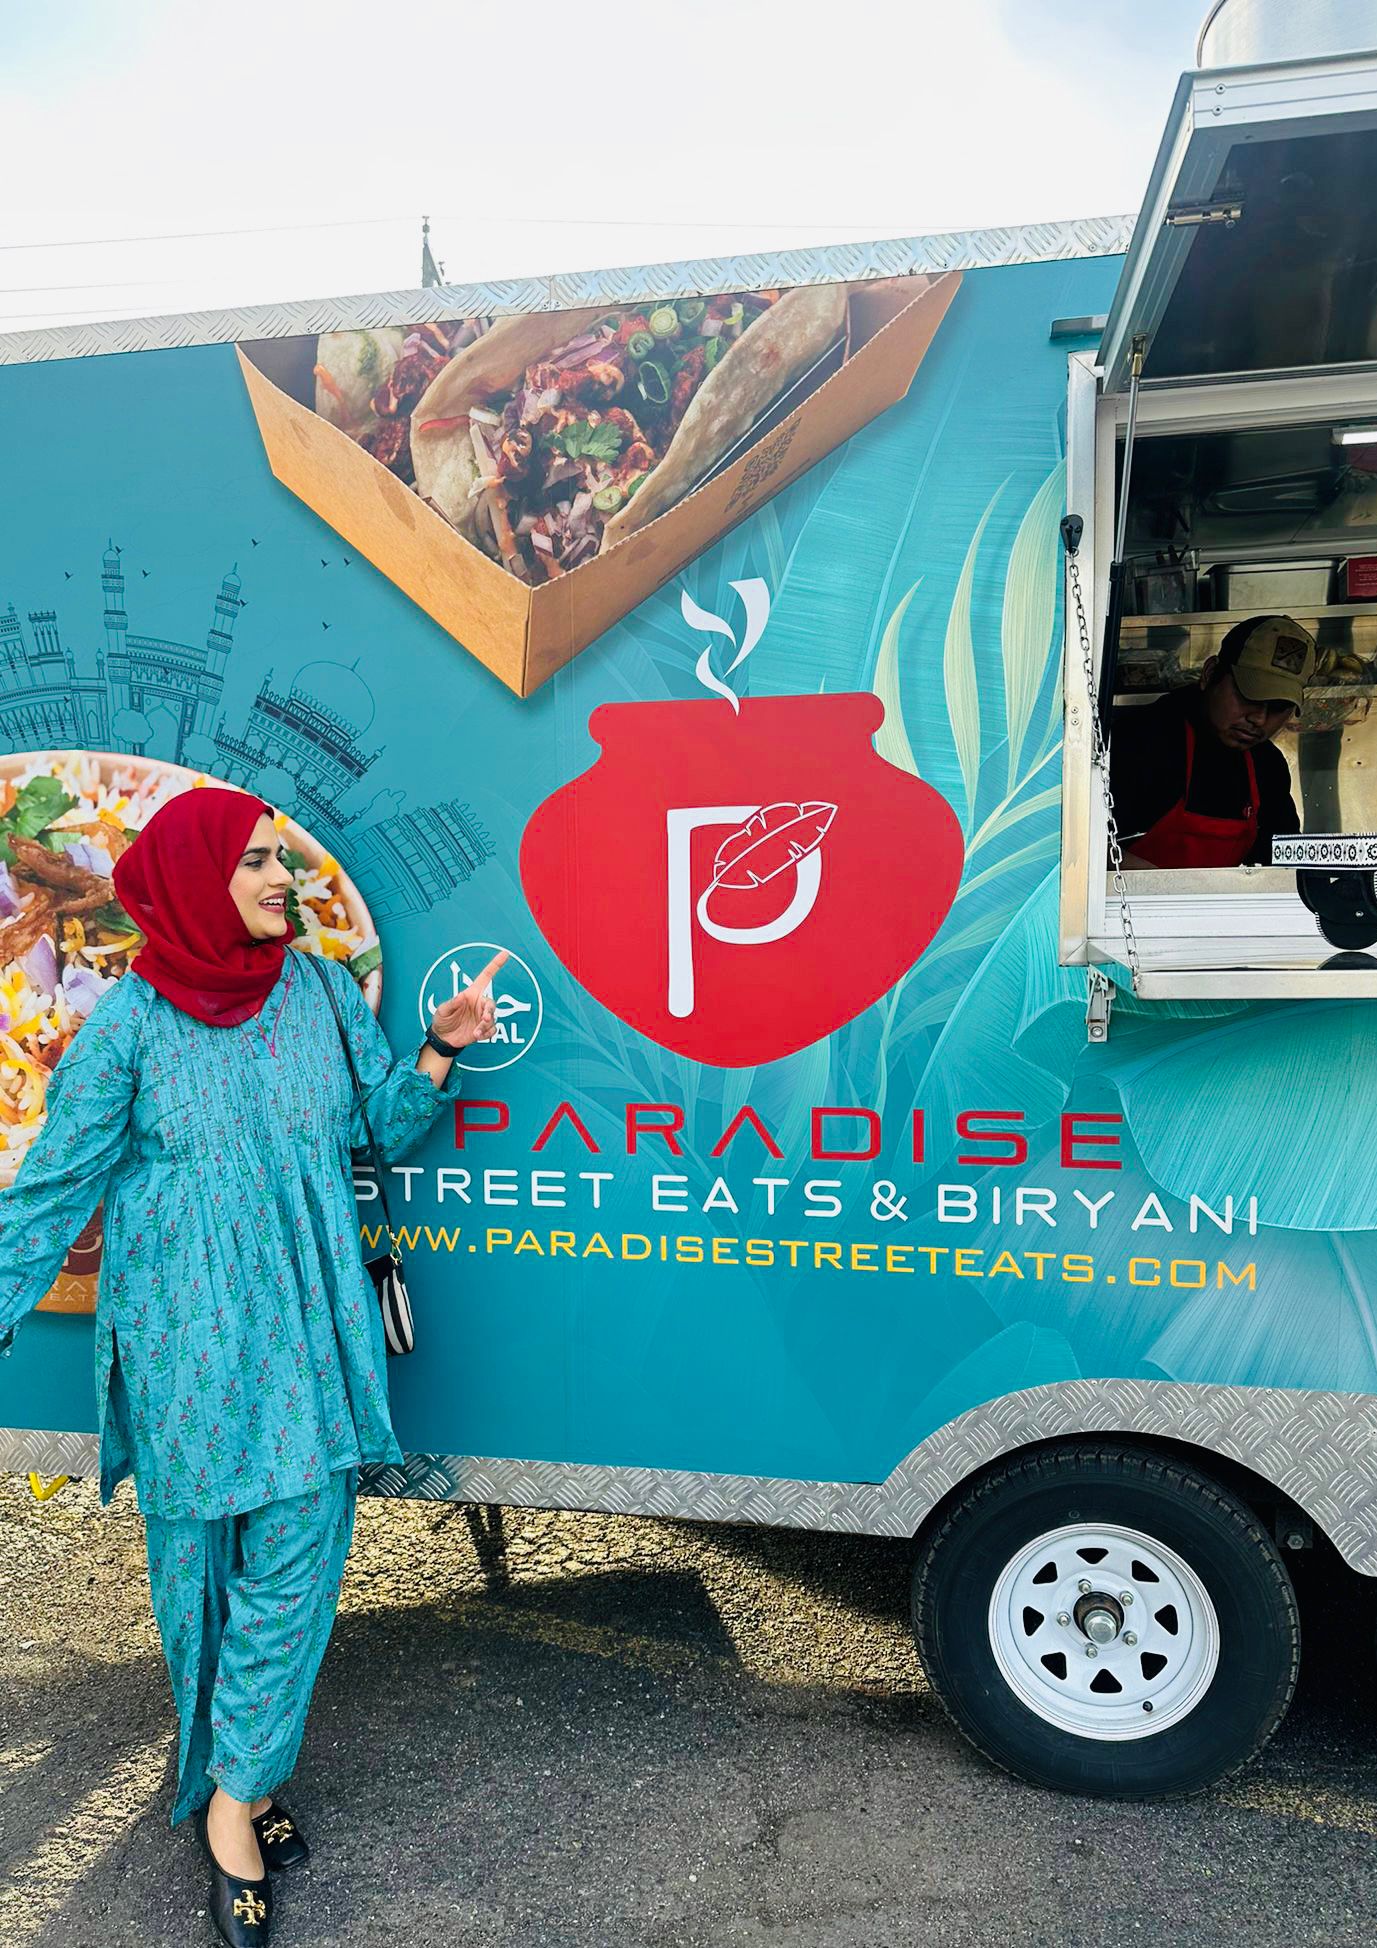 A woman in aqua blue dress and scarlet headscarf standing in front of a food truck in aqua blue and red that says Paradise Street Eats &amp; Biryani.